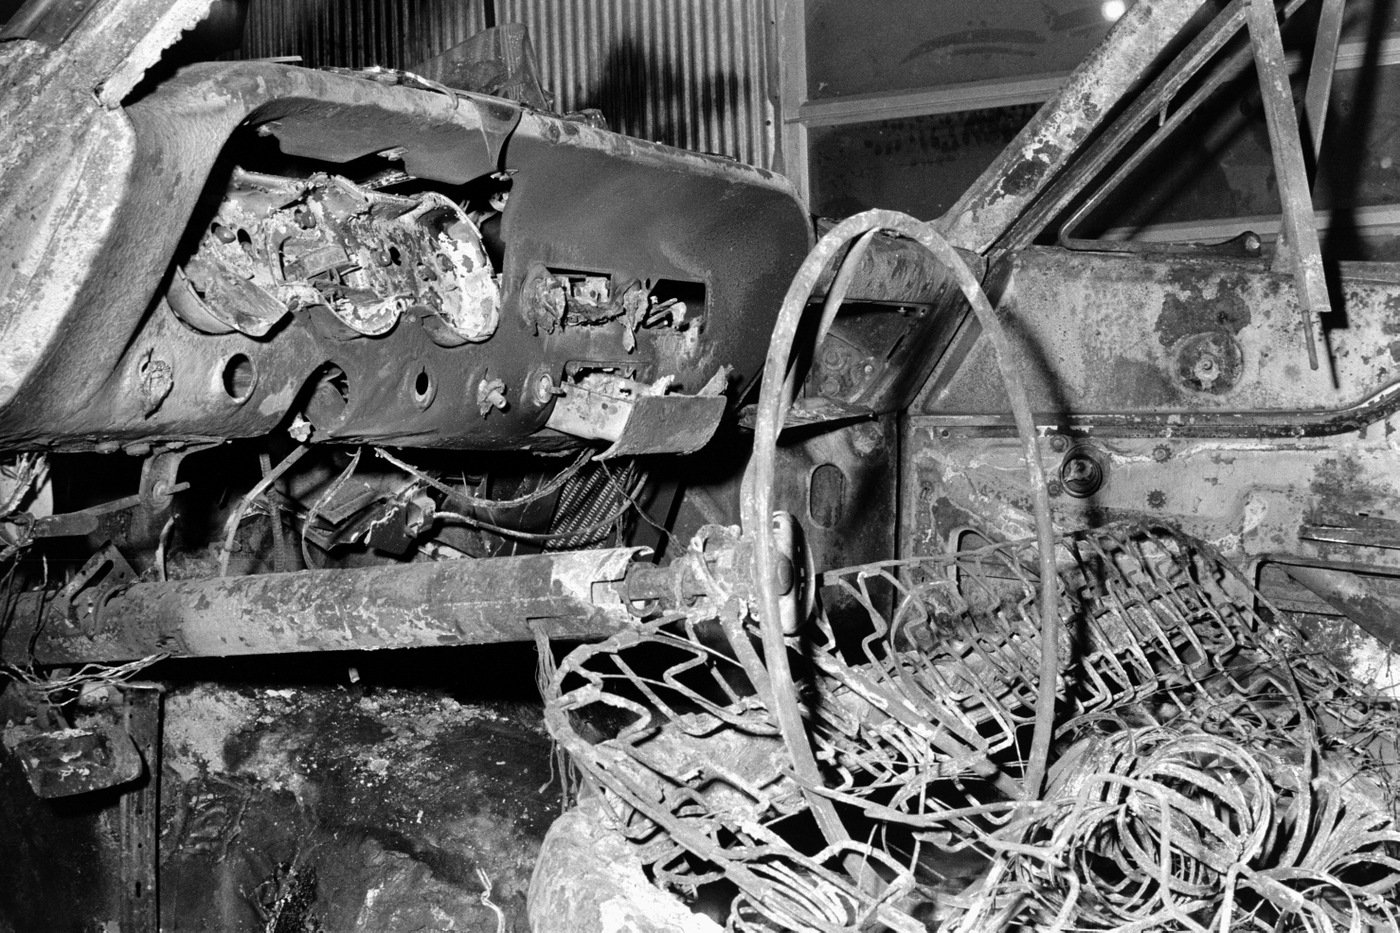 The burned interior of the station wagon that was discovered following the disappearance of activists Michael Schwerner, James Chaney, and Andrew Goodman in Mississippi in 1964.